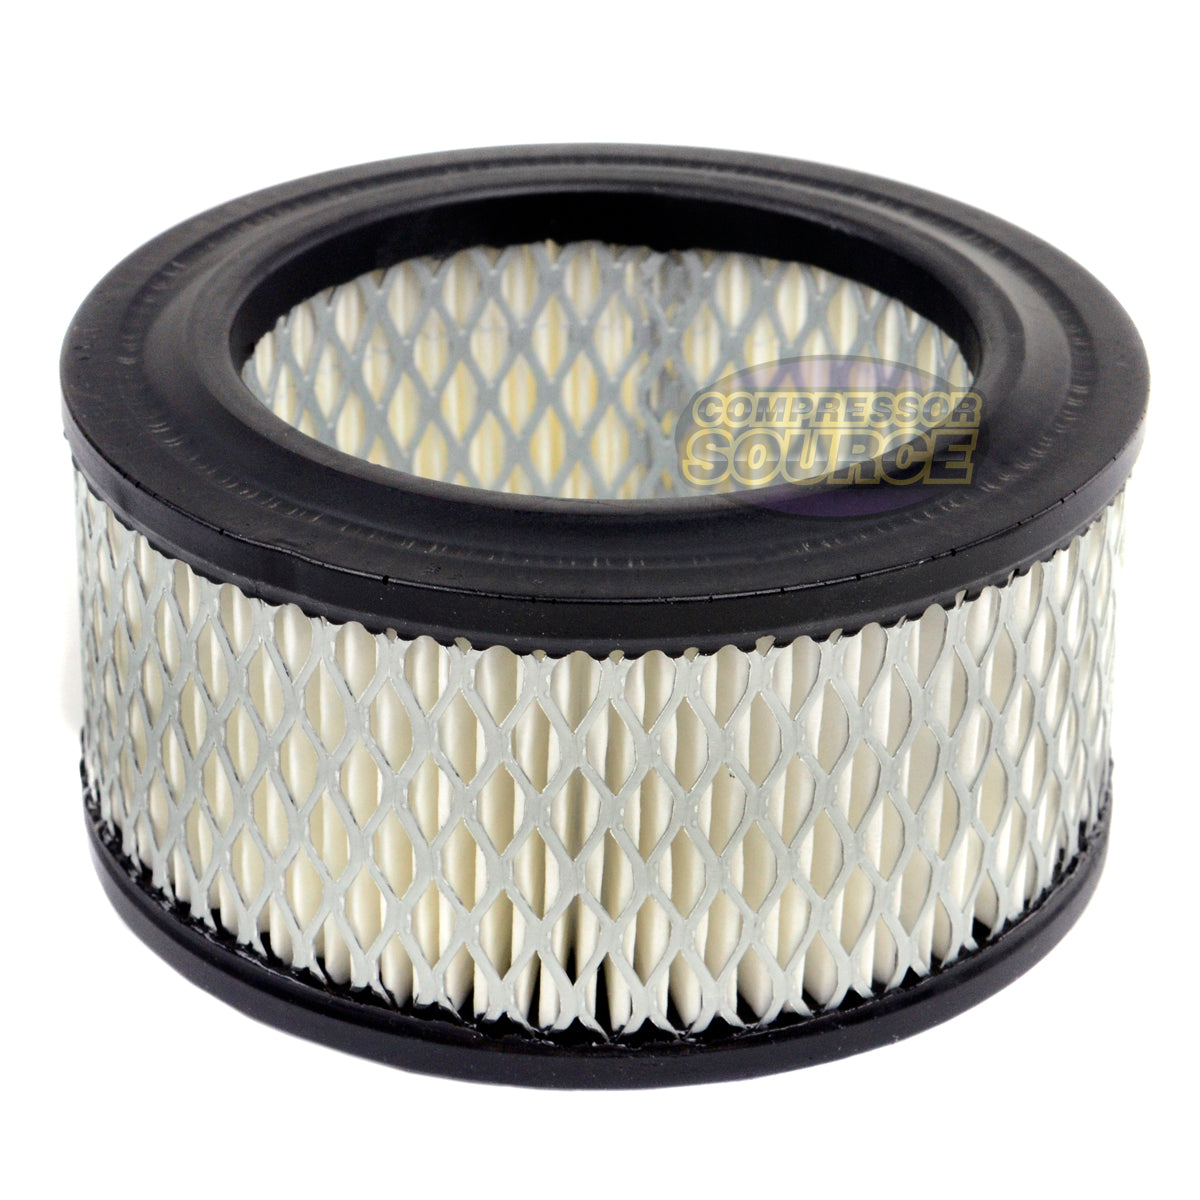 6 Air Compressor Air Intake Filter Elements #14 A424 For Ingersoll Rand Replacement 32170979